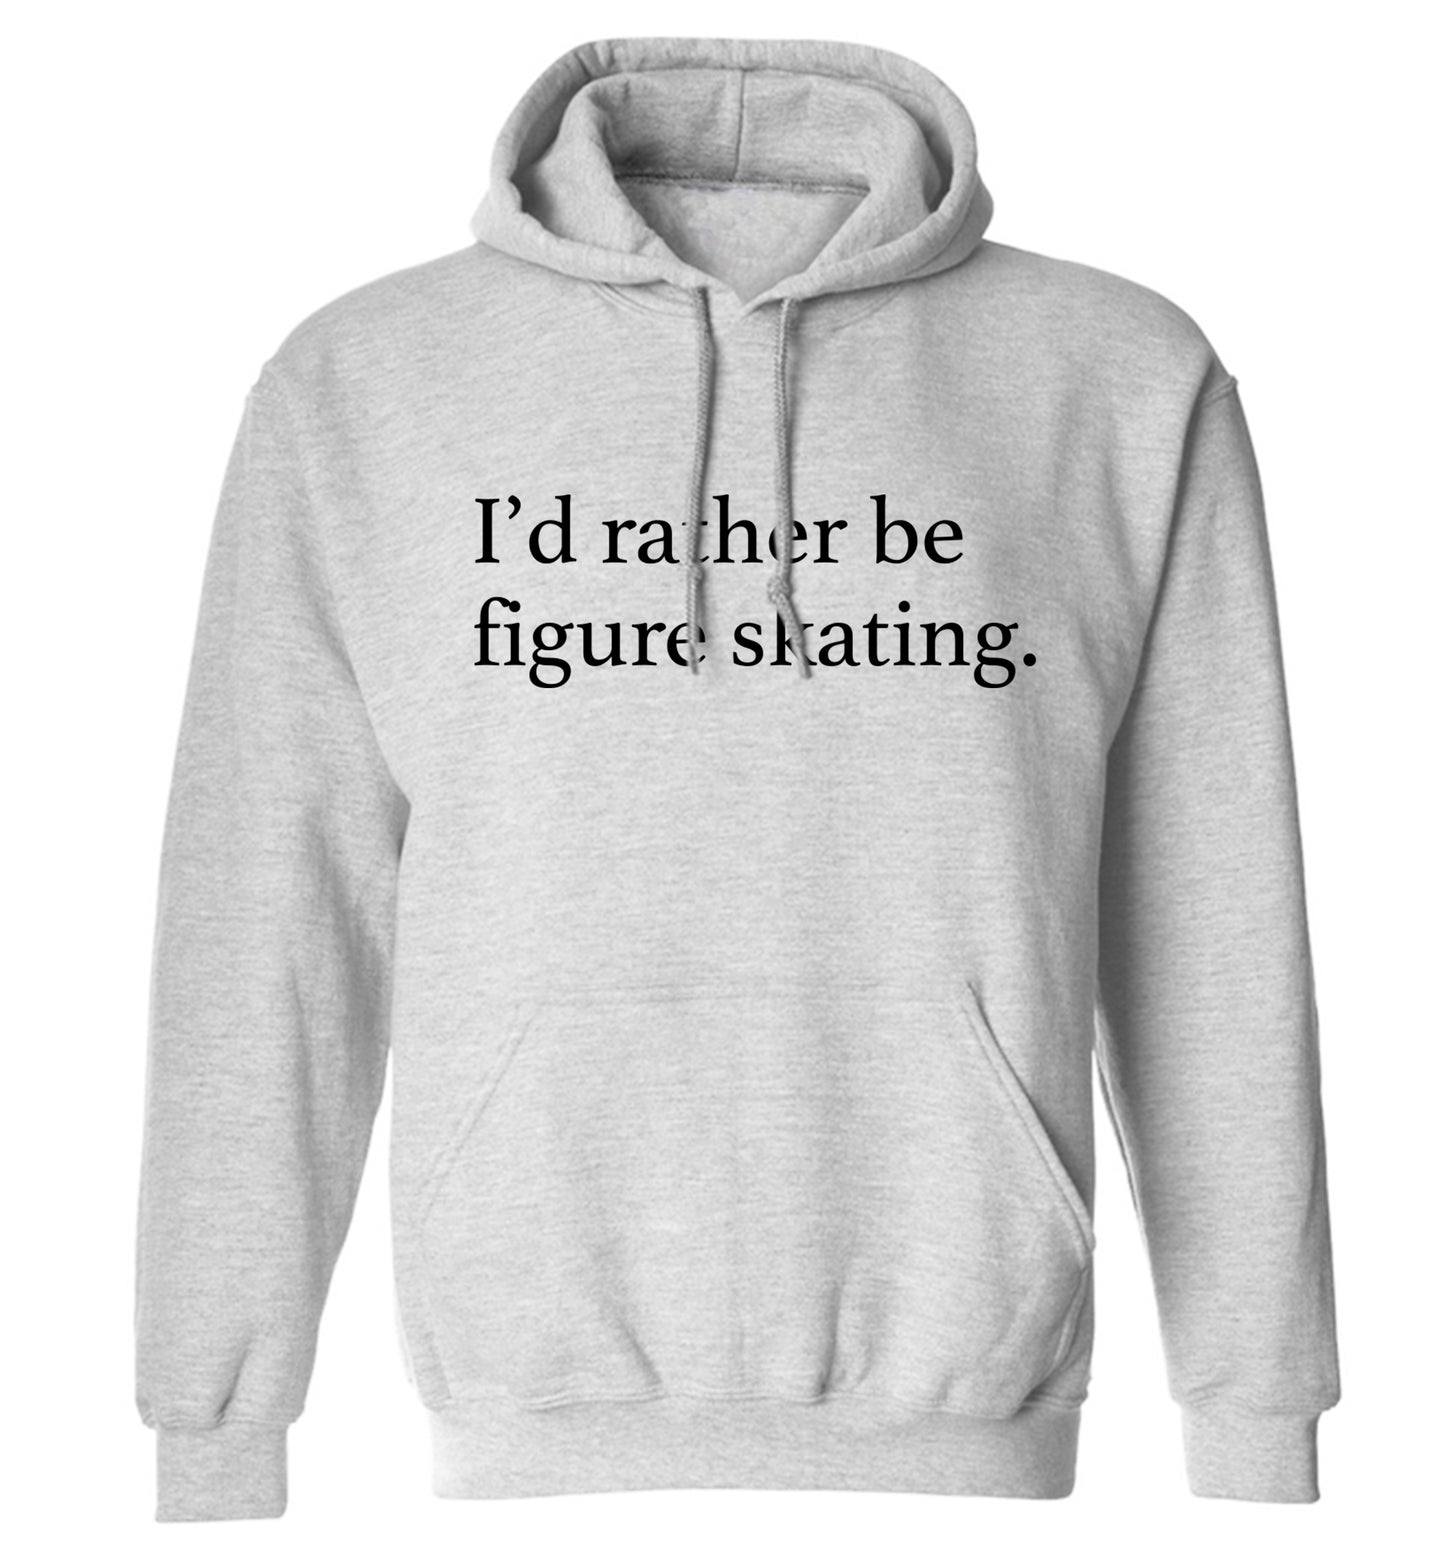 I'd rather be figure skating adults unisexgrey hoodie 2XL